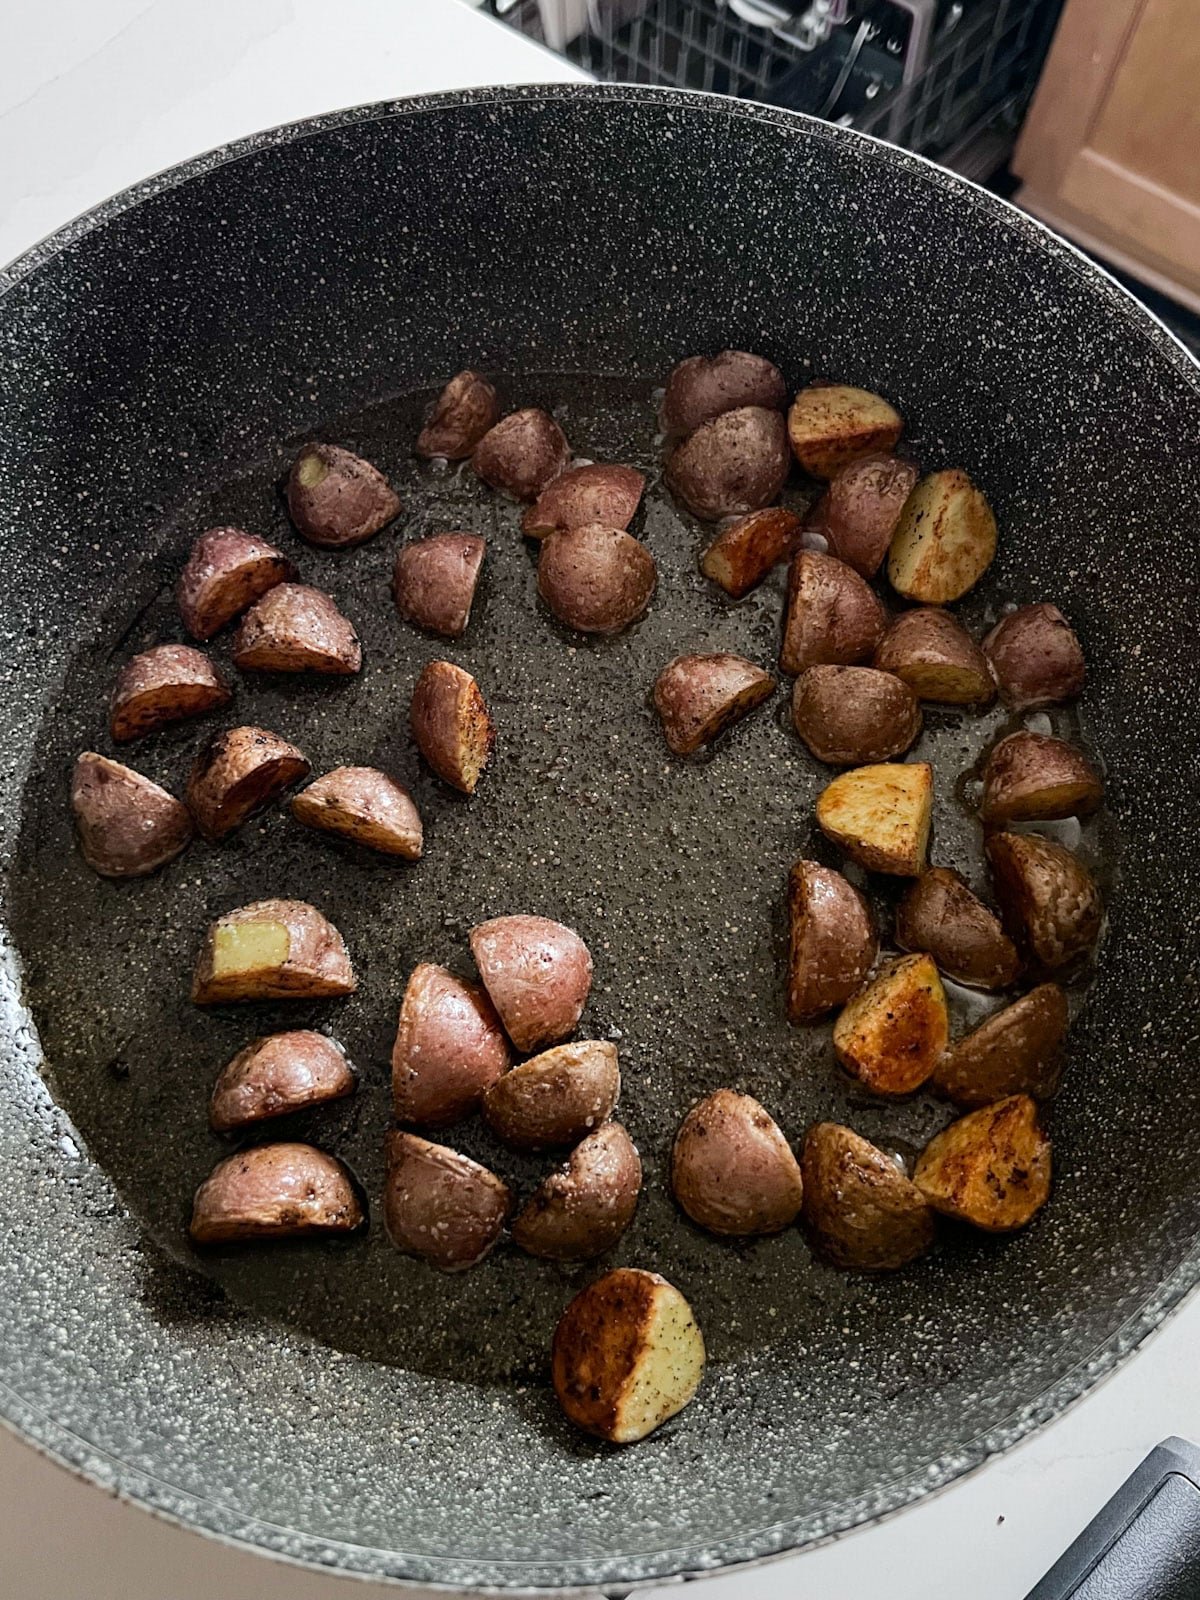 Almost fully cooked potatoes cooking in a skillet.